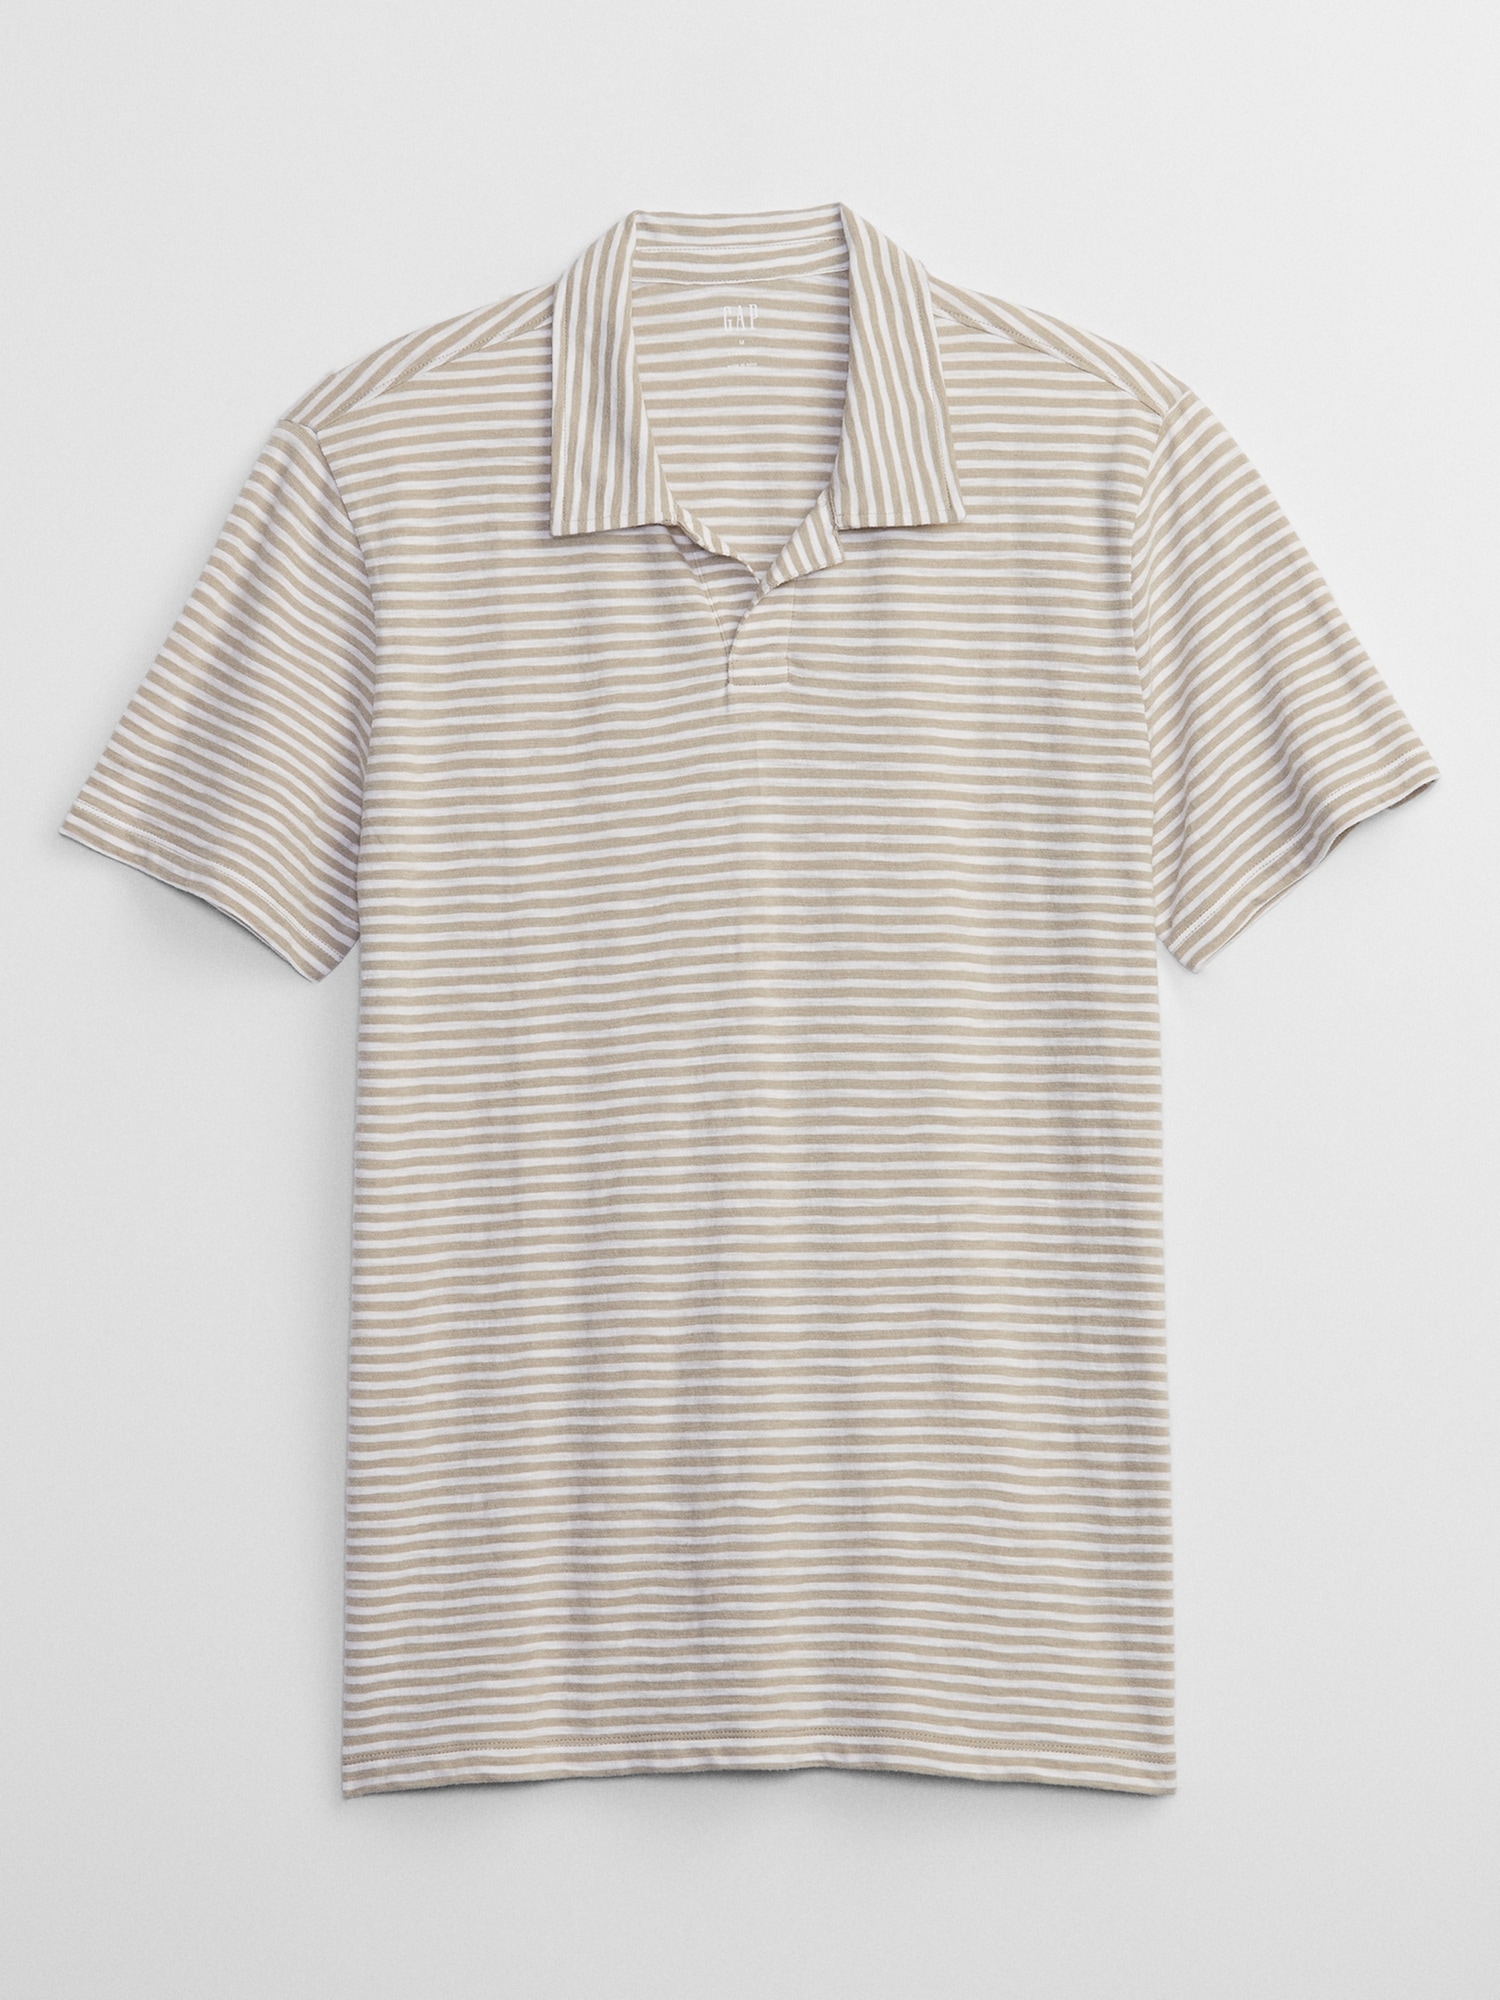 Lived-In Johnny Collar Polo Shirt | Gap Factory